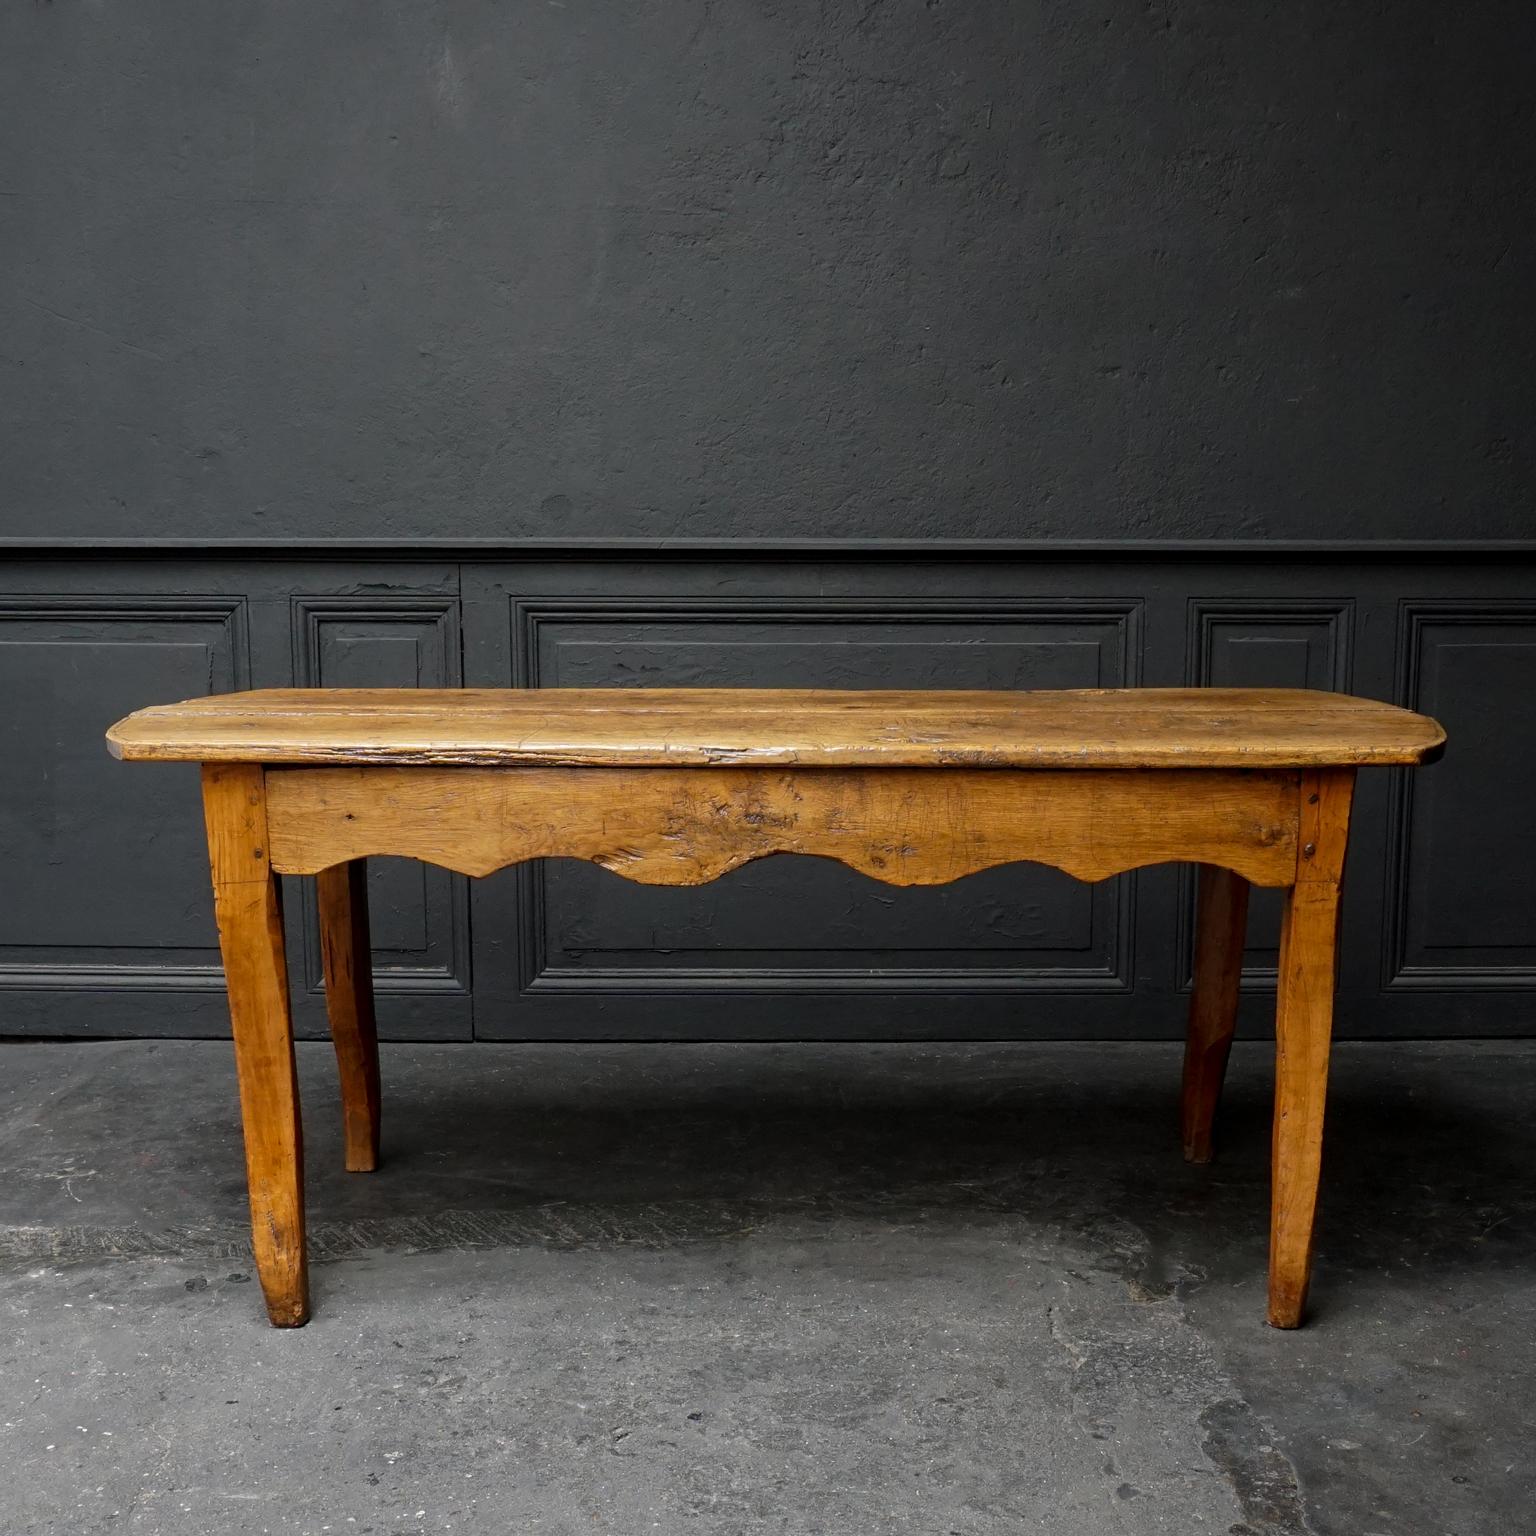 An antique French Provincial low oak farmhouse kitchen table with a nice rustic used surface above a scalloped apron edge on cabriole shaped legs.
As you can see the tabletop has plenty of heavily used character including two very decorative holes